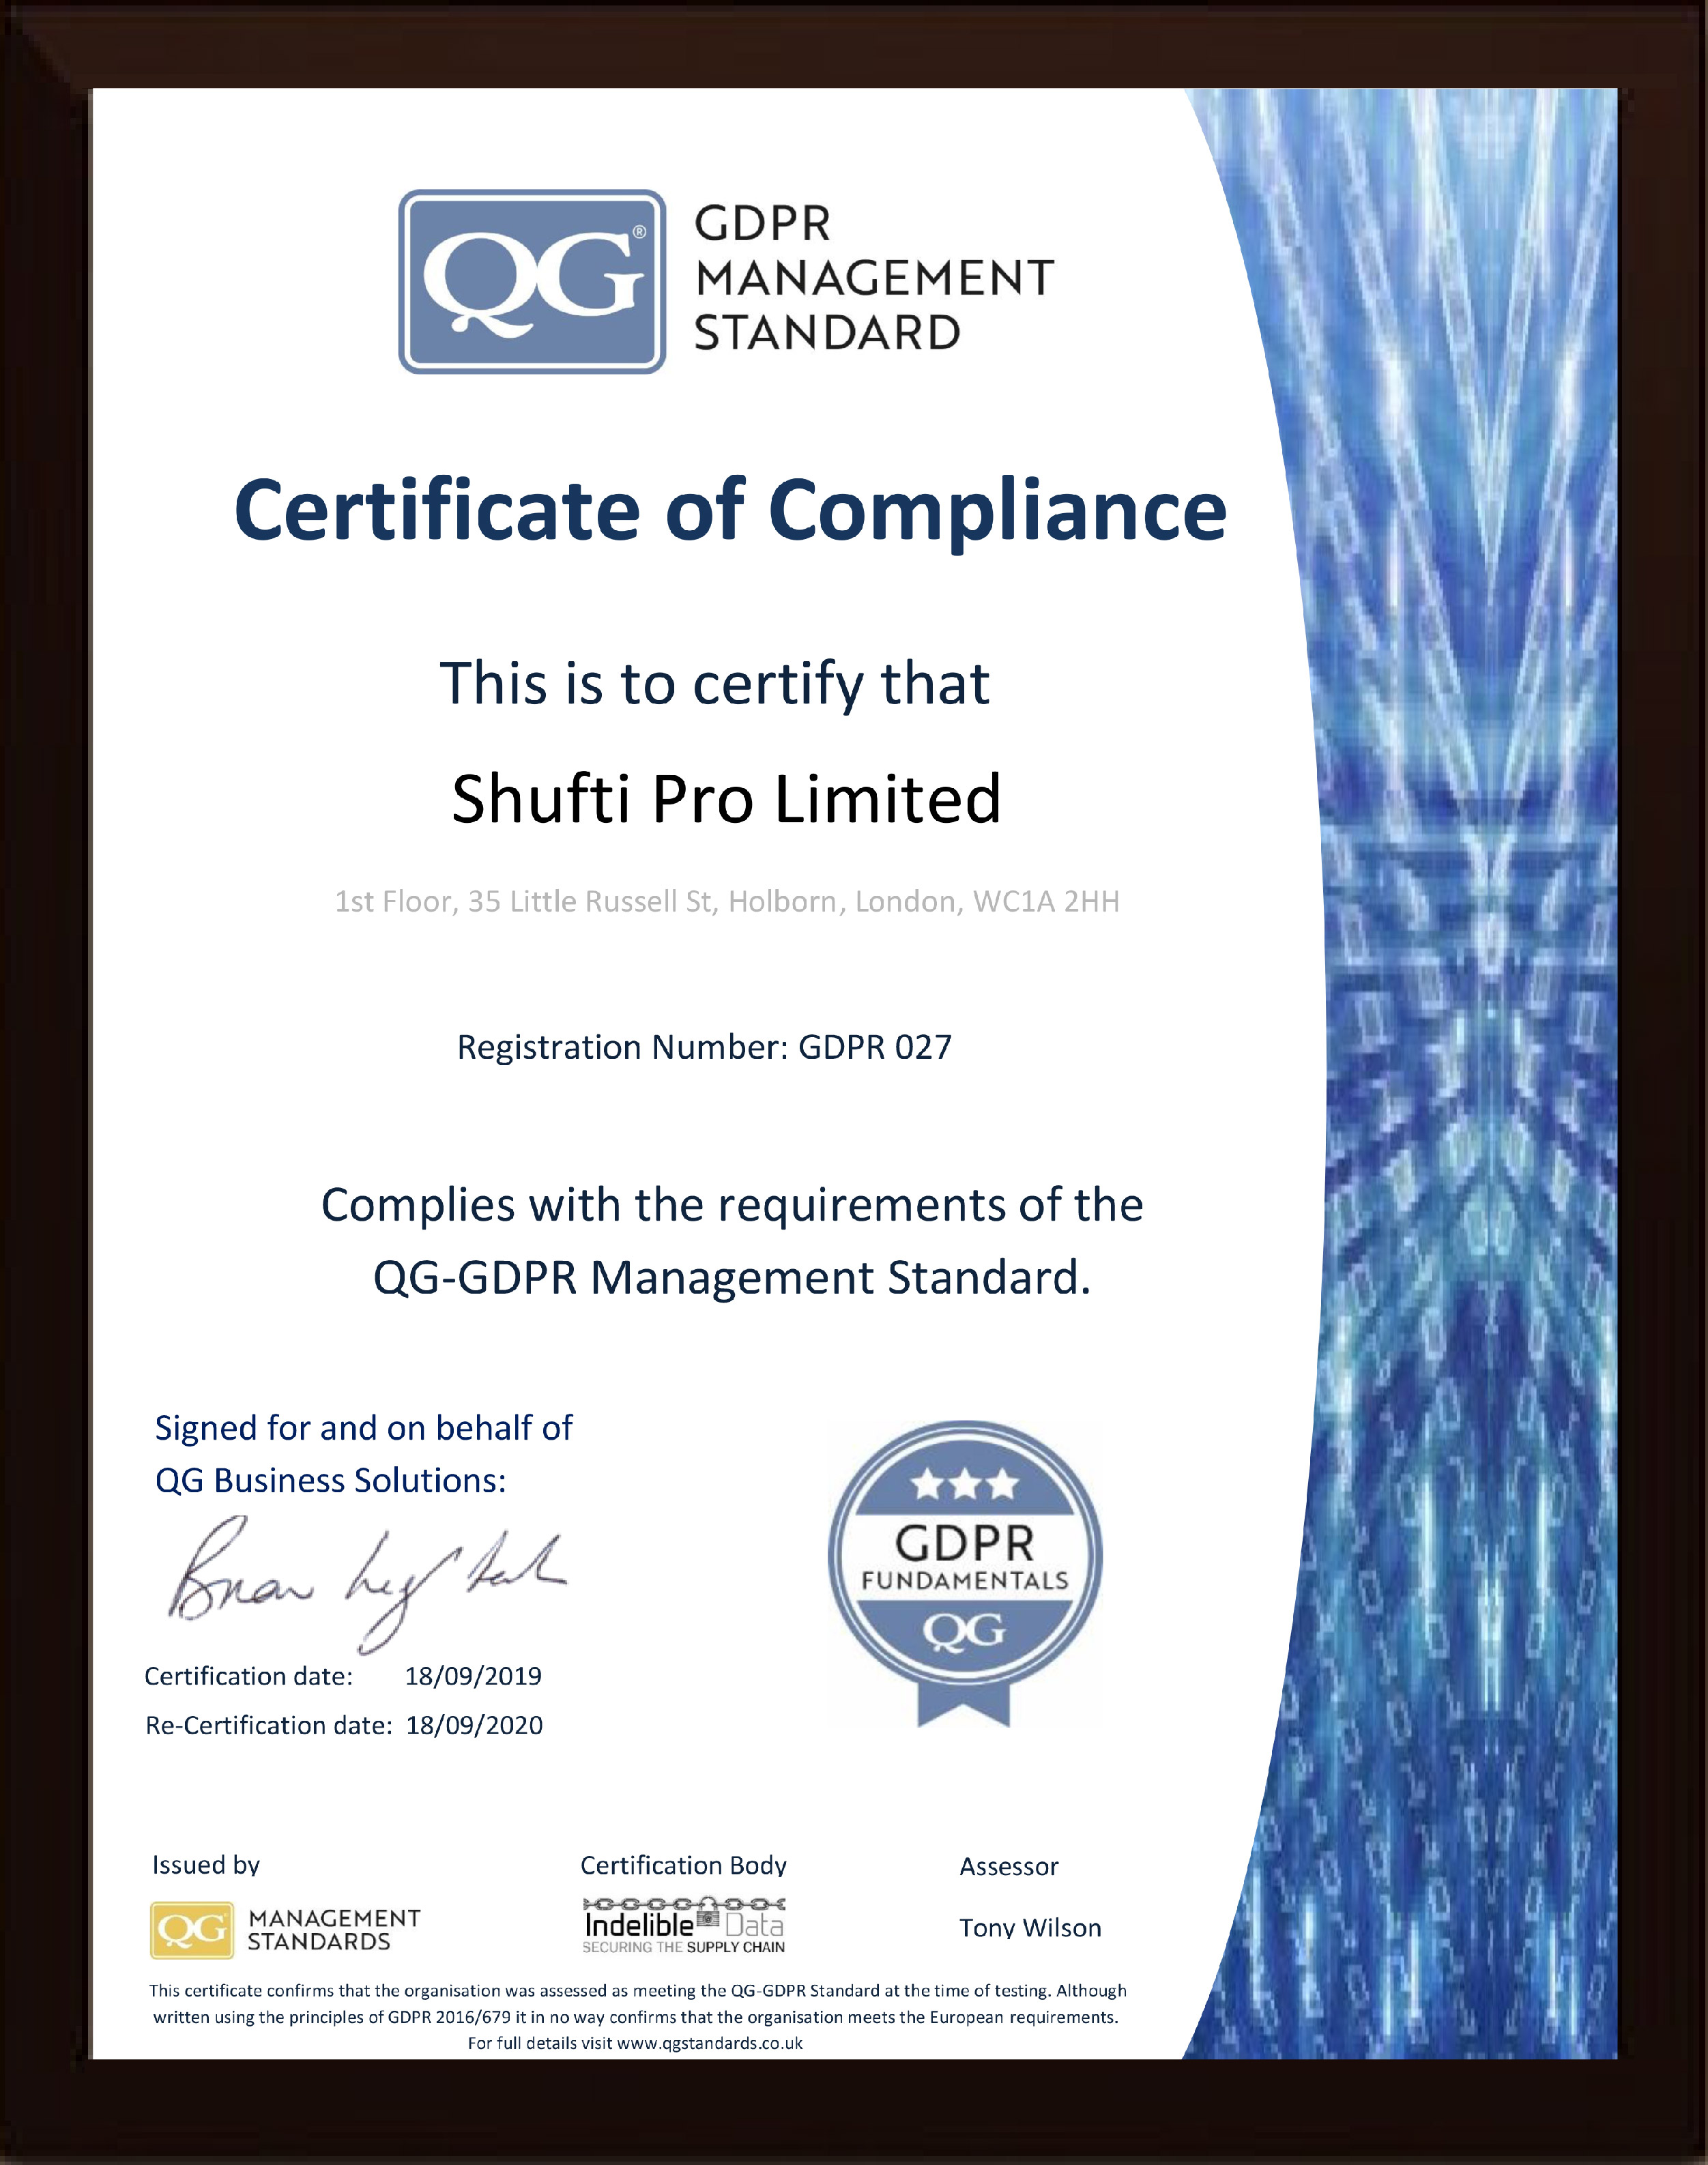 Another Feather in the Cap - Shufti Pro Becomes Guild Certified